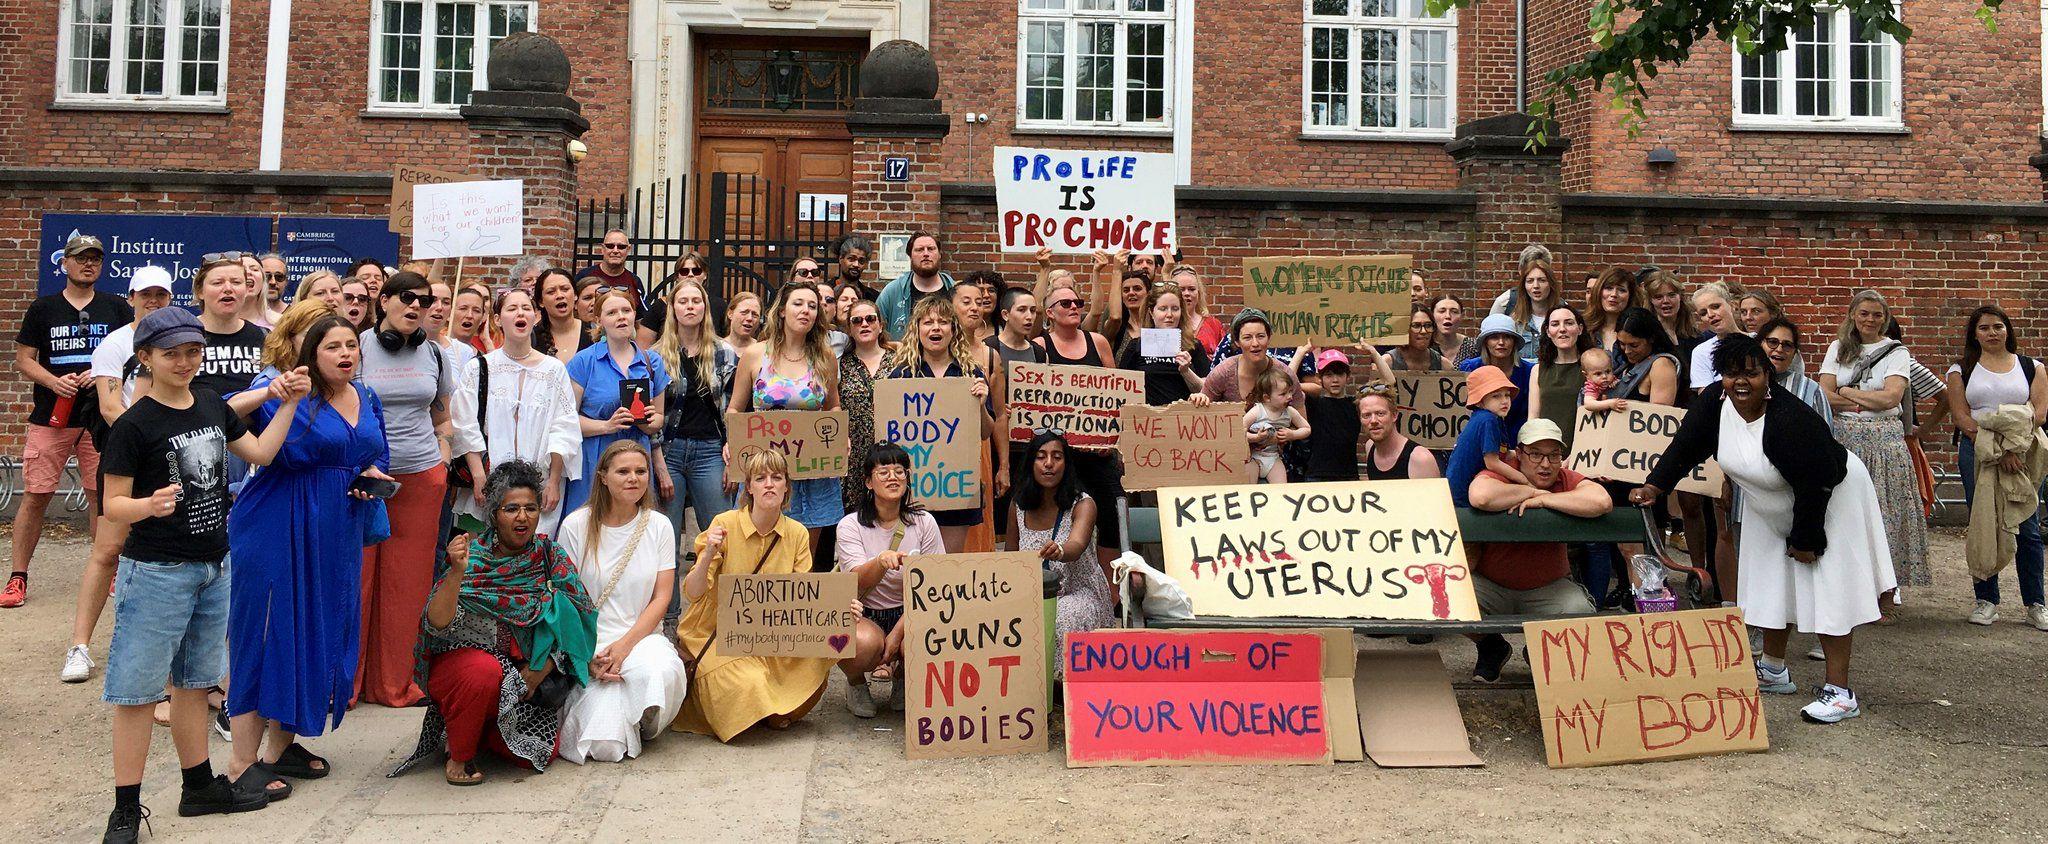 A crowd of primarily women with some men and children in summer clothing stand in front of an old brick building with cardboard signs with slogans in support of women's rights and reproductive freedom